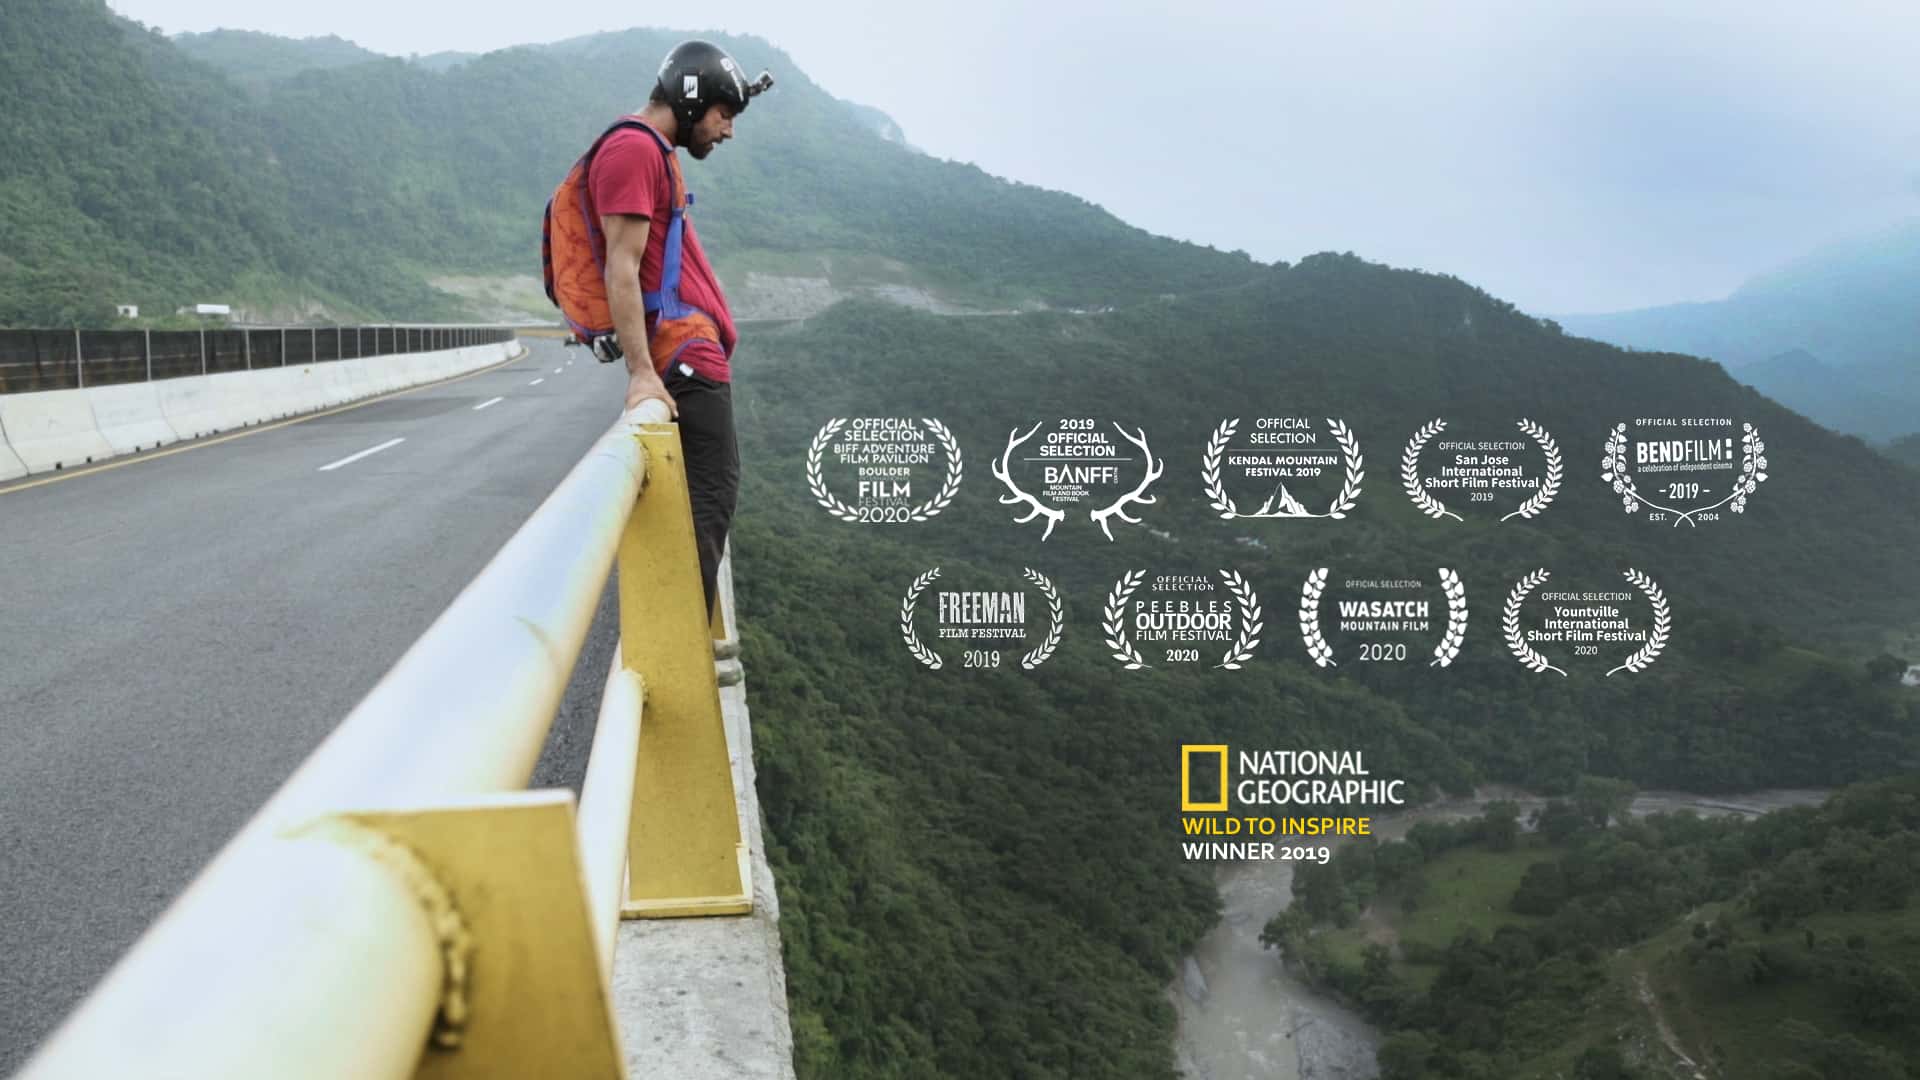 Mountain Culture: Award-winning BASE Jumping Short Film “The Flip” Released Online Today